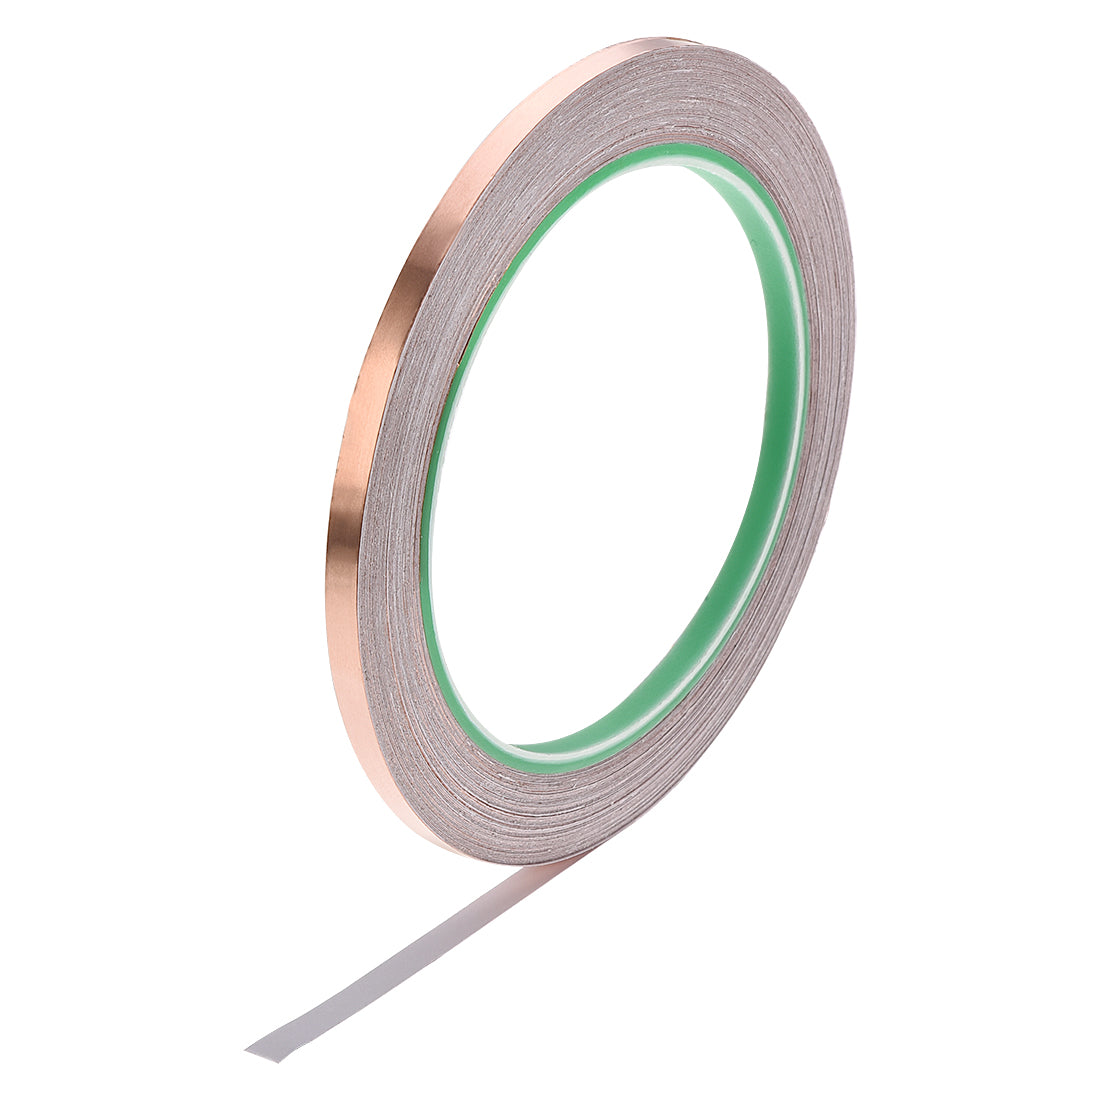 Uxcell Uxcell Double Sided Conductive Tape Copper Foil Tape 25mm x 20m for EMI Shielding